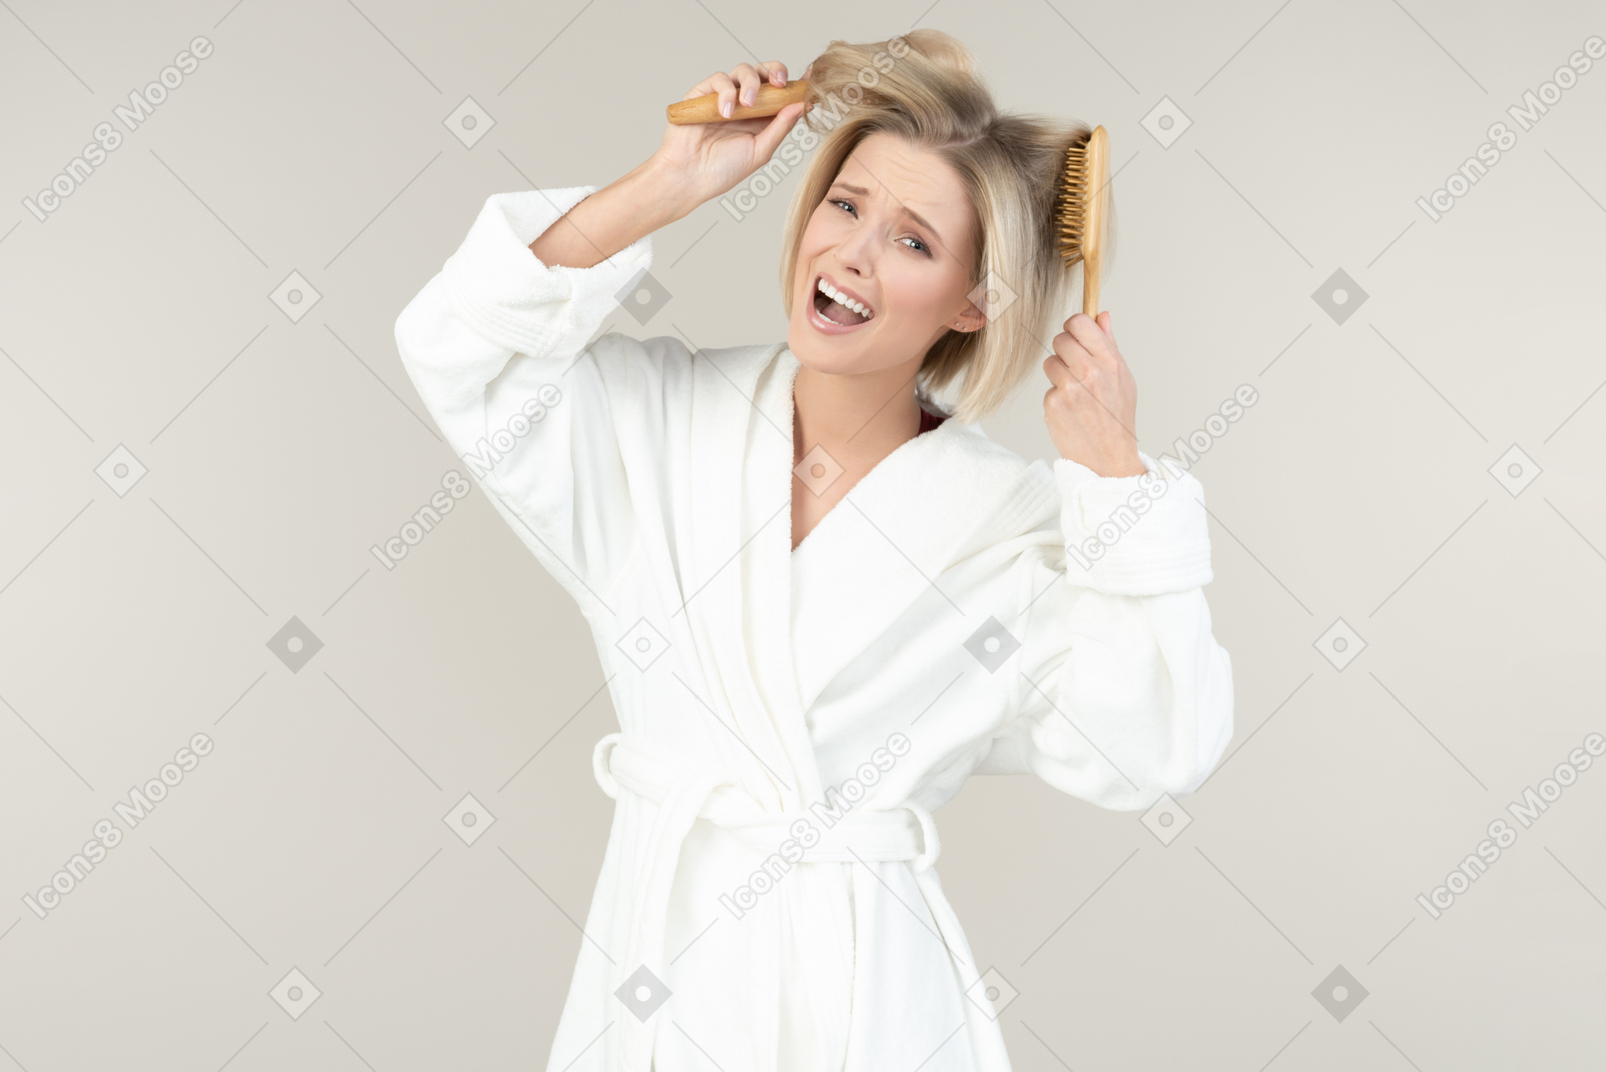 Young blonde woman in a white bathrobe posing with all kinds of toiletries